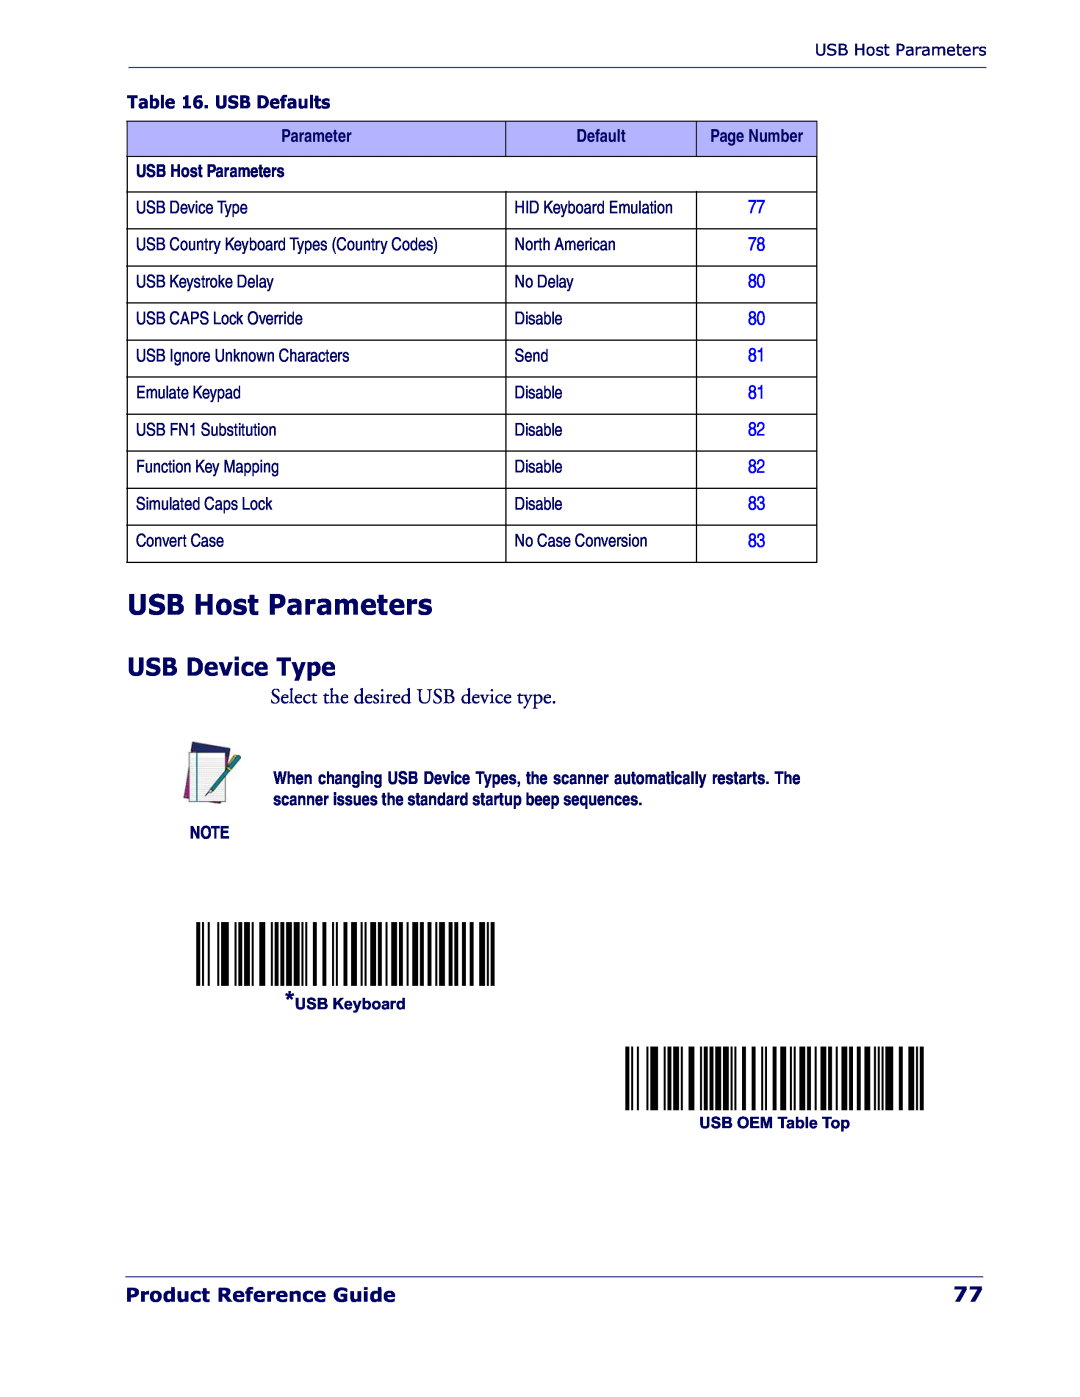 Datalogic Scanning QD 2300 manual USB Host Parameters, USB Device Type, Product Reference Guide, USB Defaults 